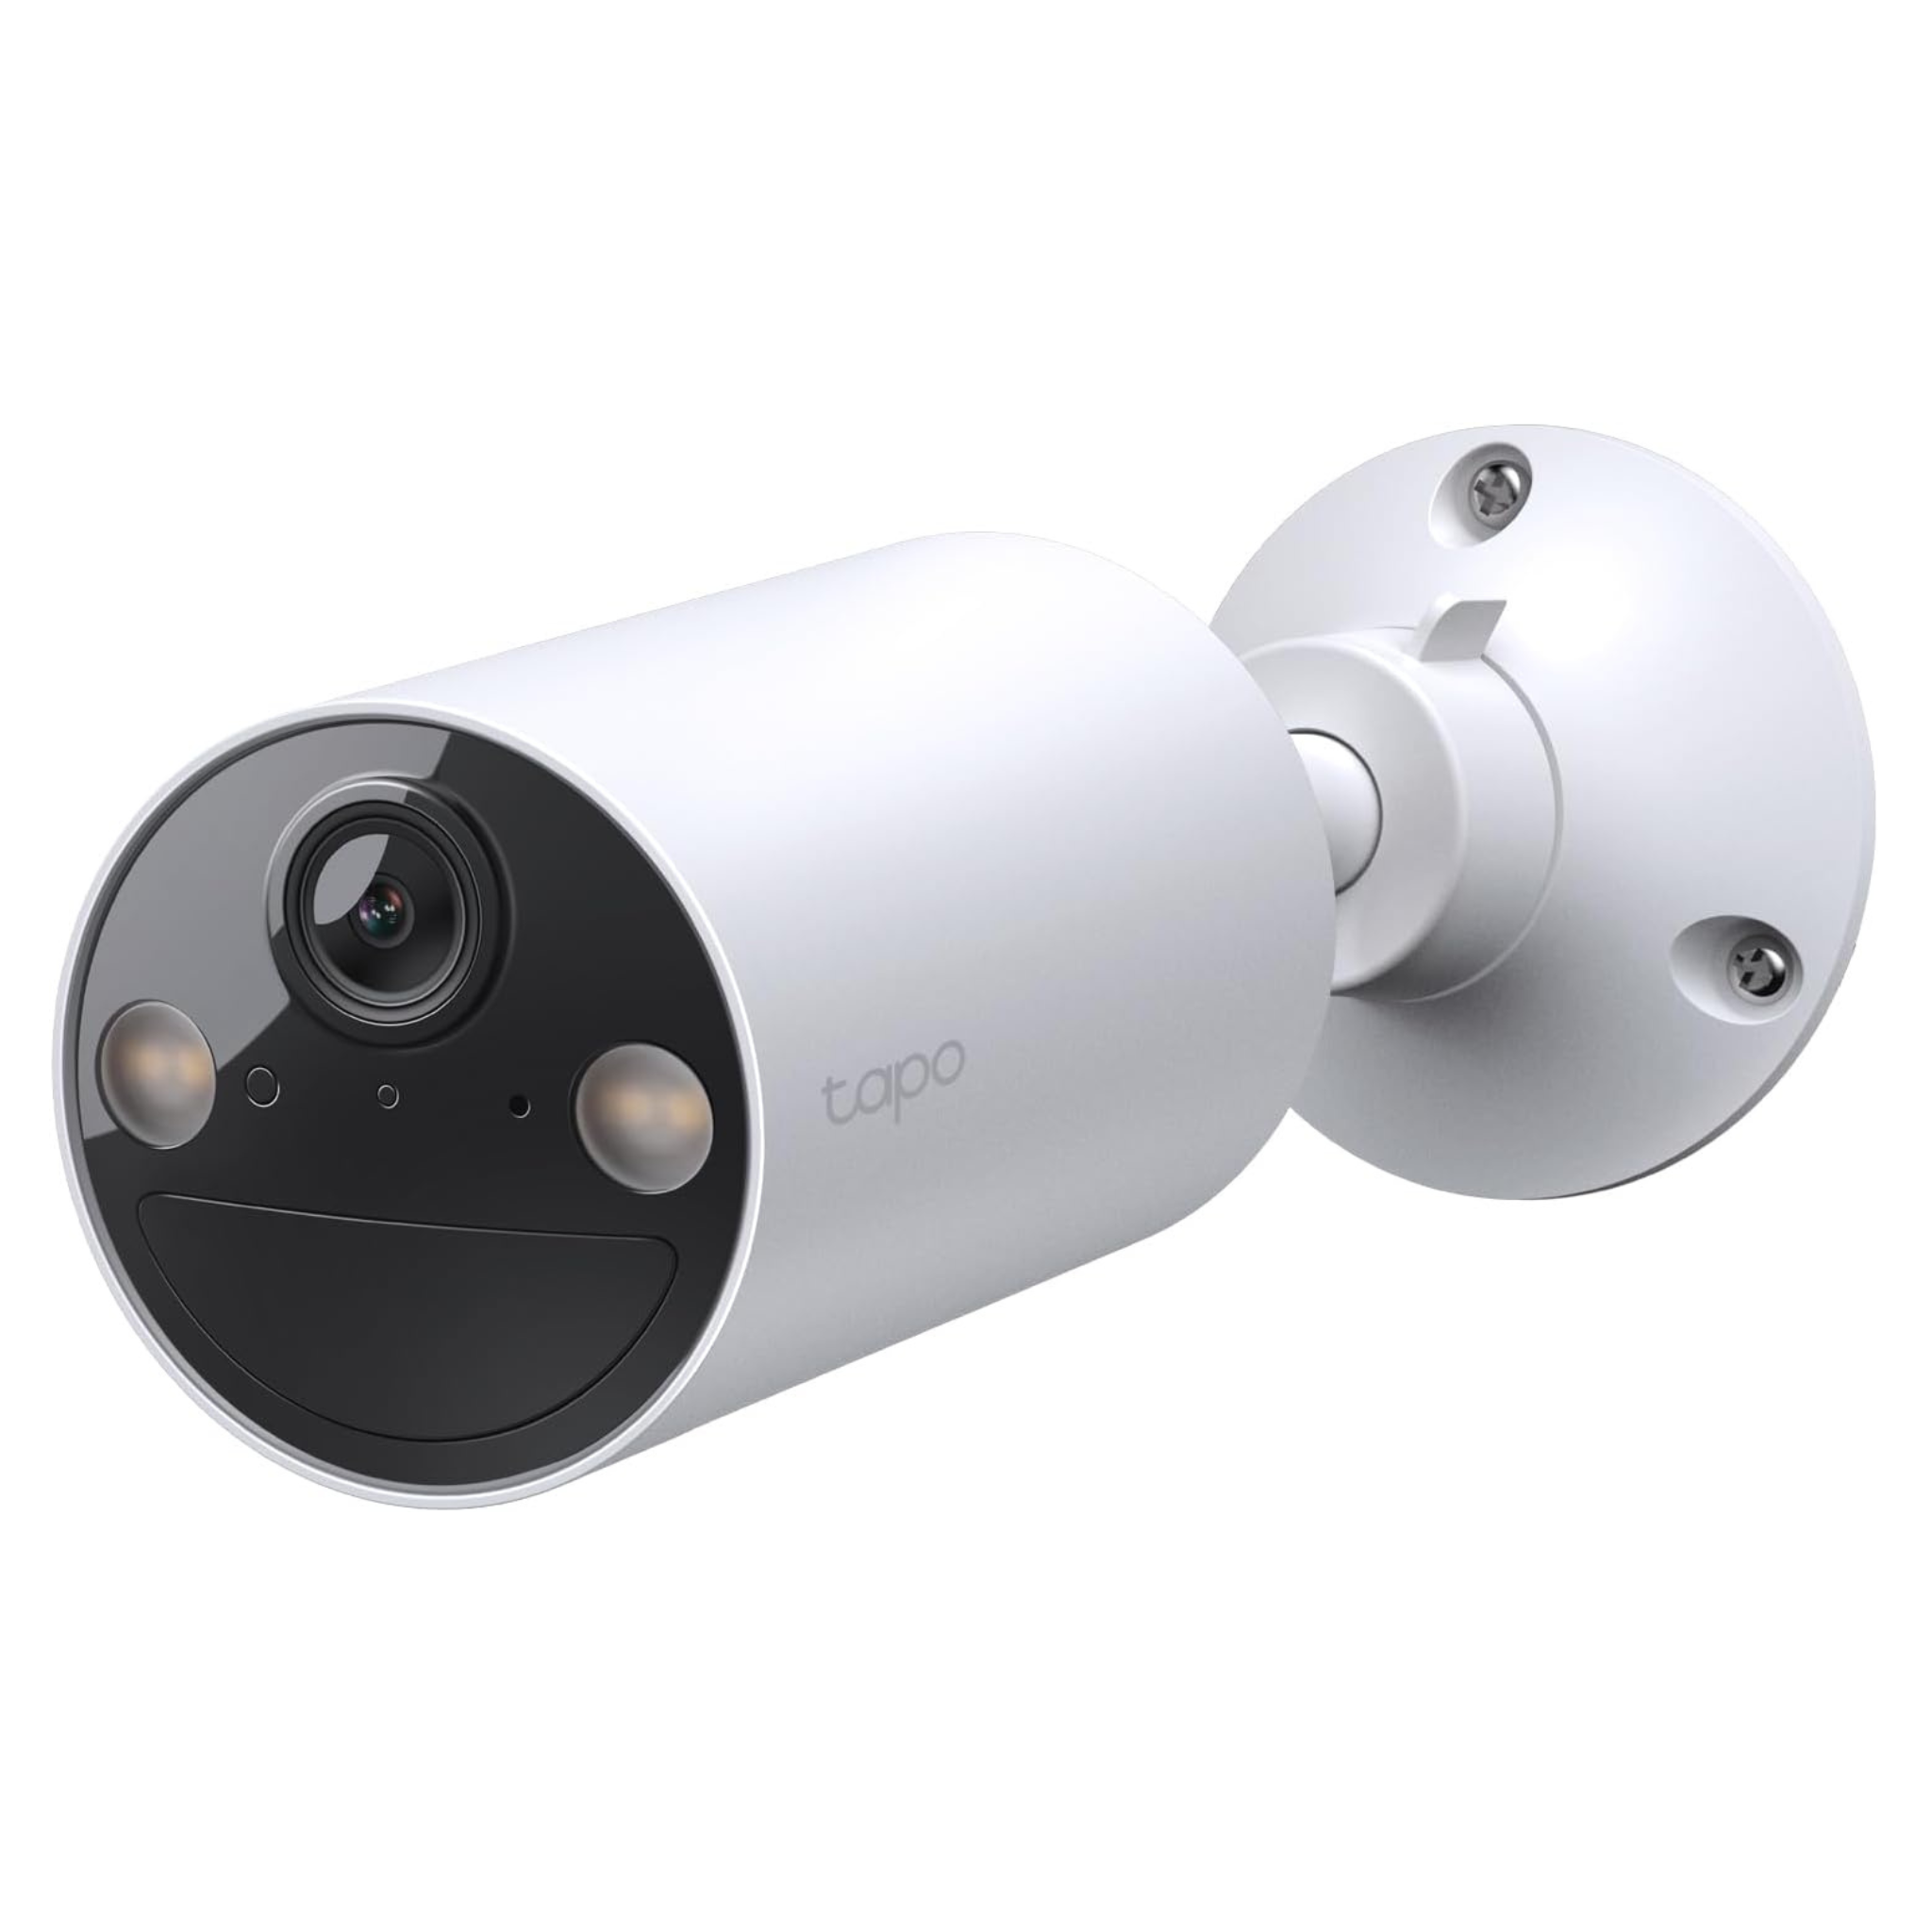 TP-Link Tapo Security Cameras